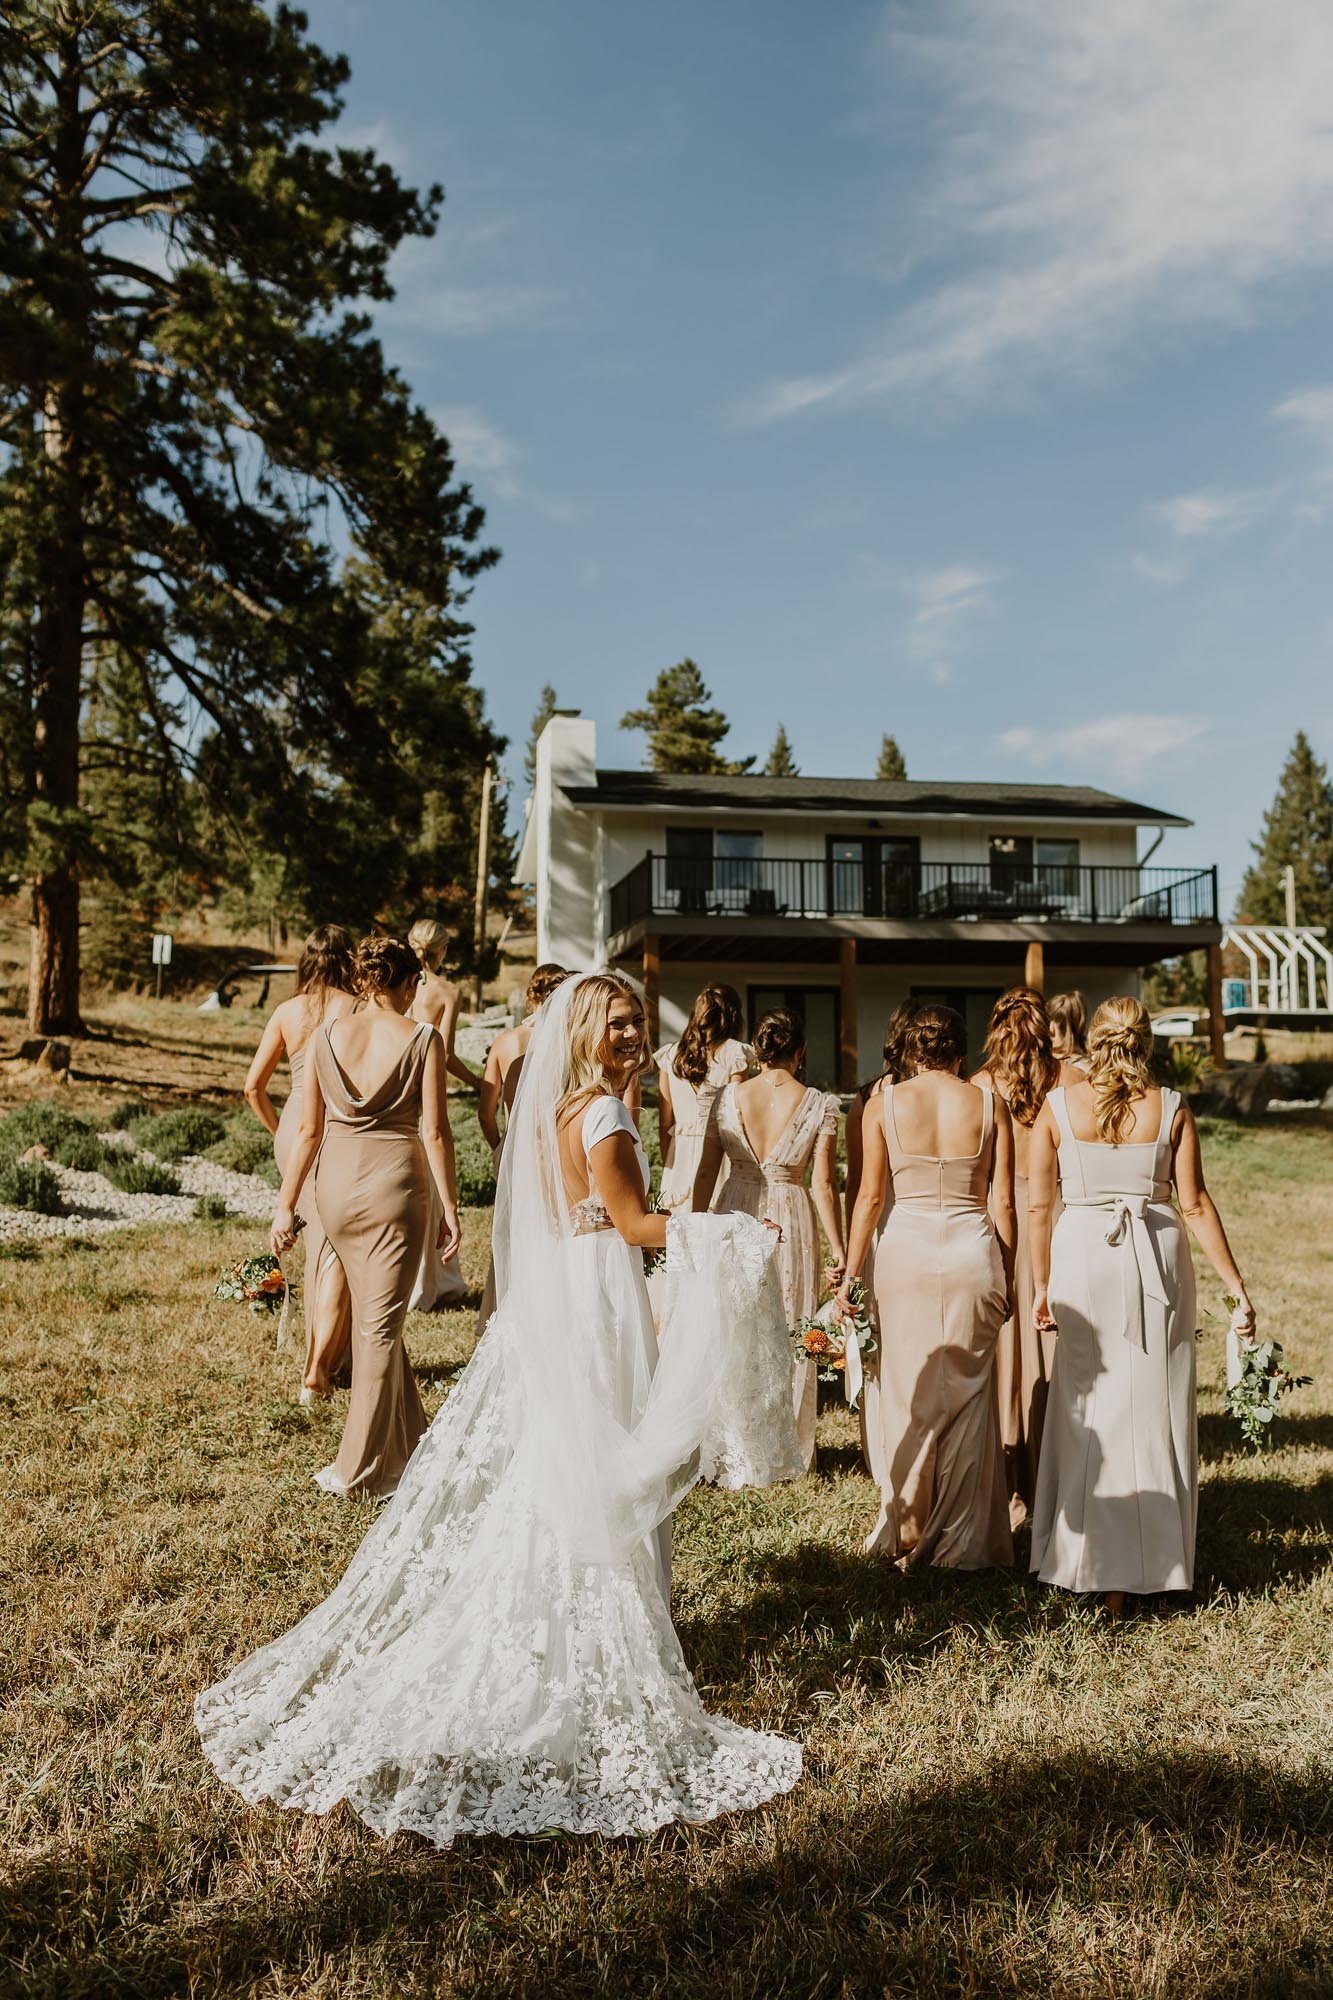  a bride wearing a white lace wedding dress and long lace veil is walking with her bridesmaids towards their cabin wedding venue 